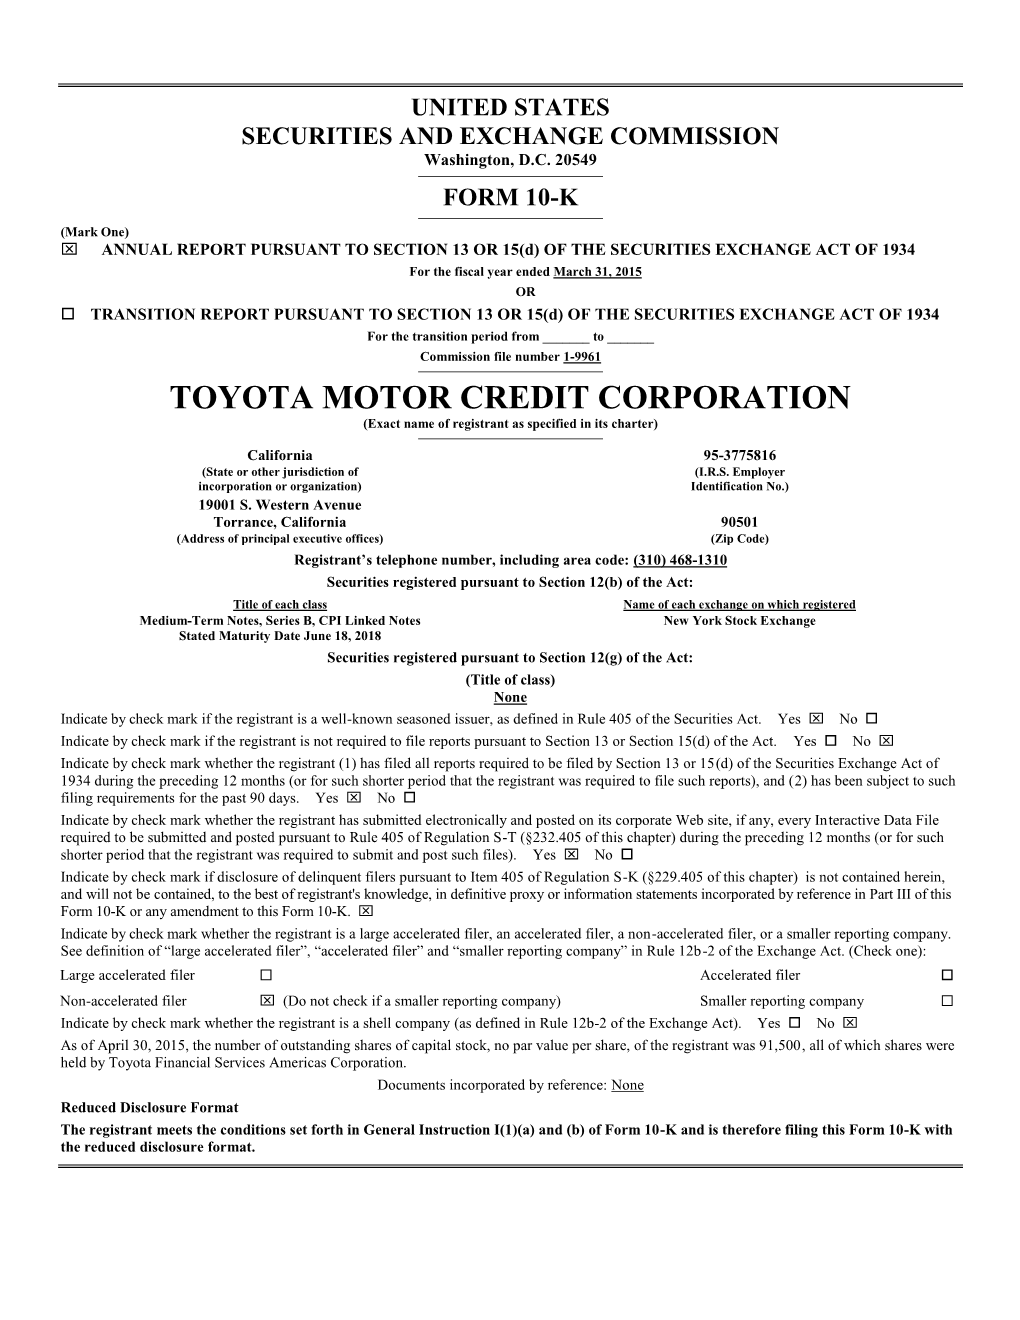 TOYOTA MOTOR CREDIT CORPORATION (Exact Name of Registrant As Specified in Its Charter)